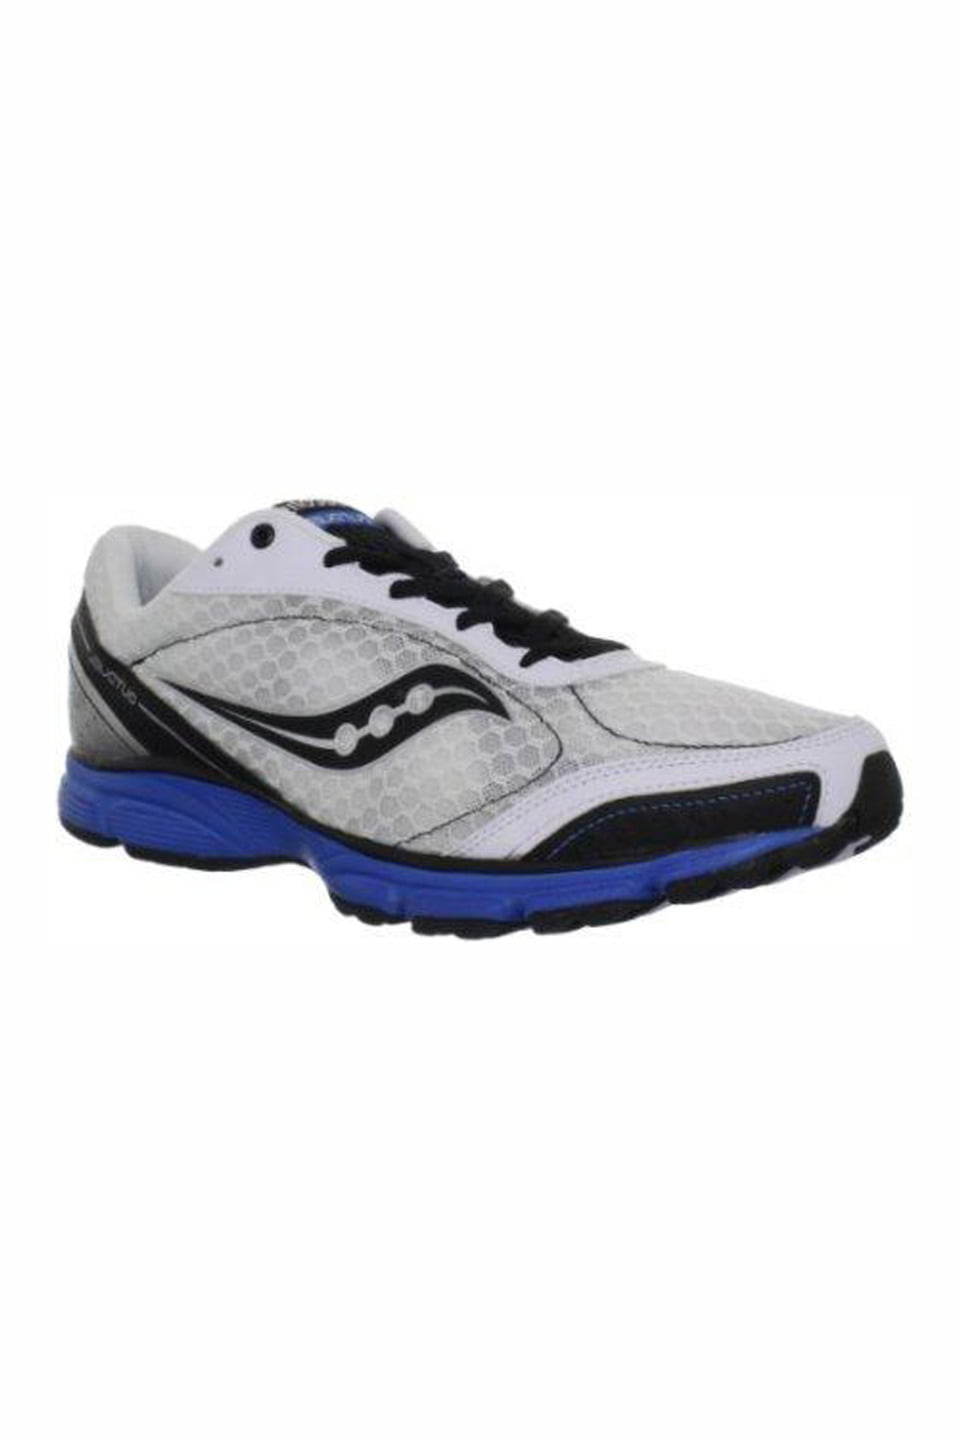 saucony outduel running shoe